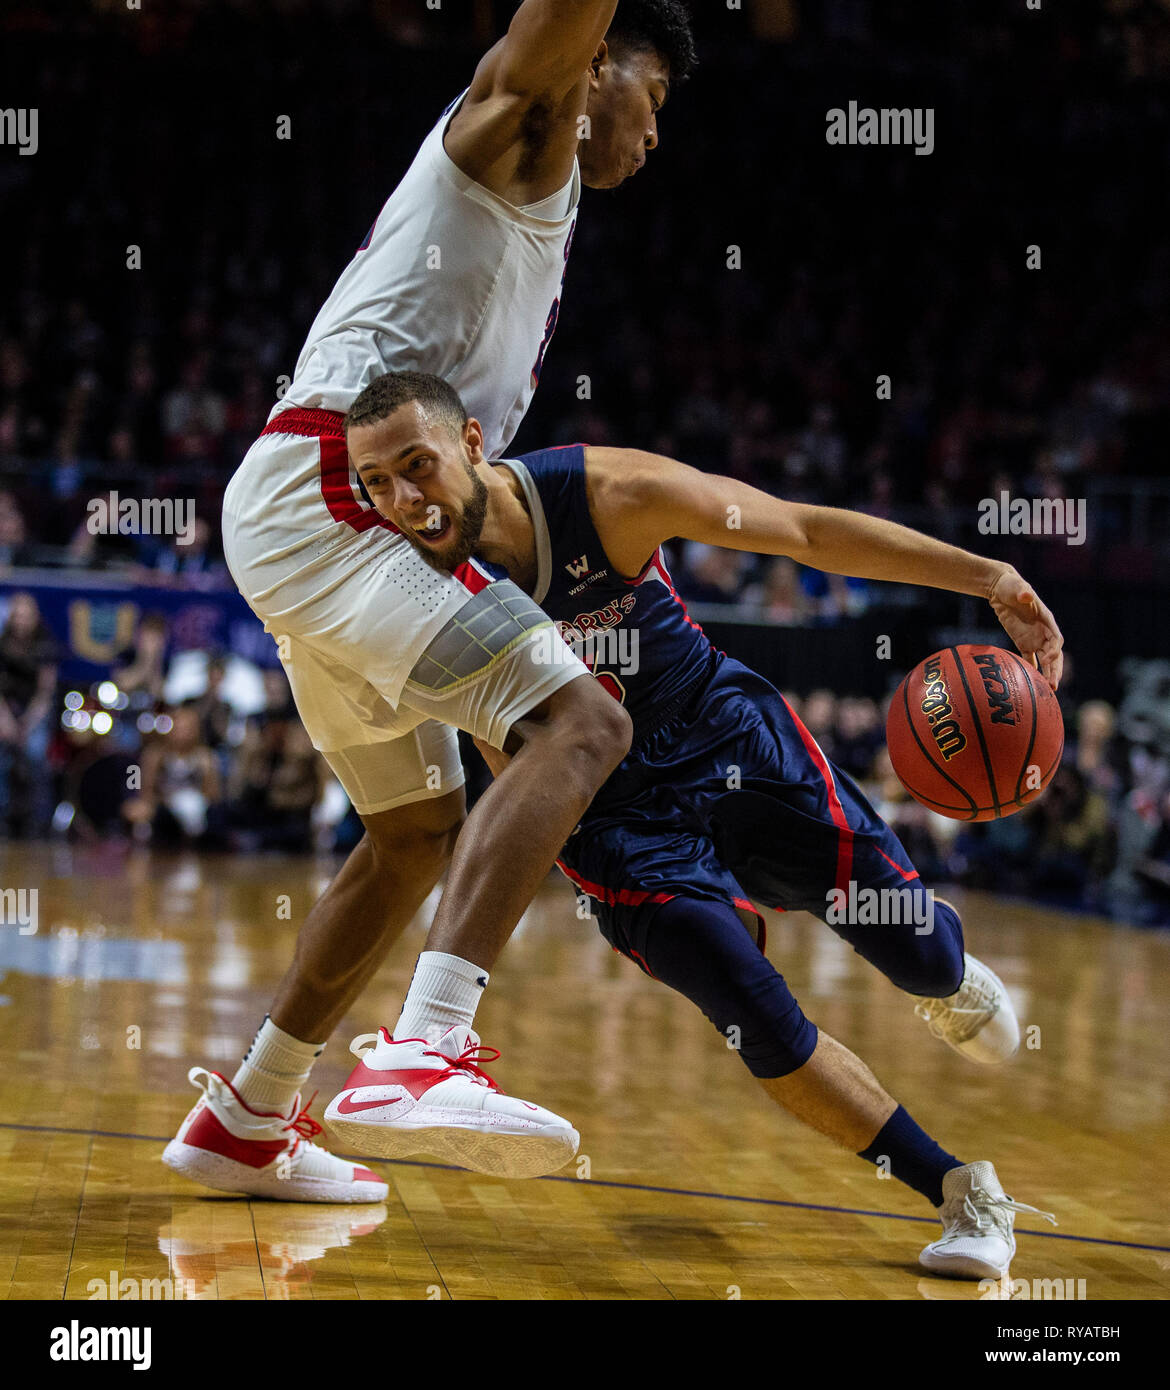 Mar 12 2019 Las Vegas, NV, U.S.A. St. Mary's guard Jordan Ford (3) drives to the basket during the NCAA West Coast Conference Men's Basketball Tournament championship between the Gonzaga Bulldogs and the Saint Mary's Gaels 60-47 win at Orleans Arena Las Vegas, NV. Thurman James/CSM Stock Photo